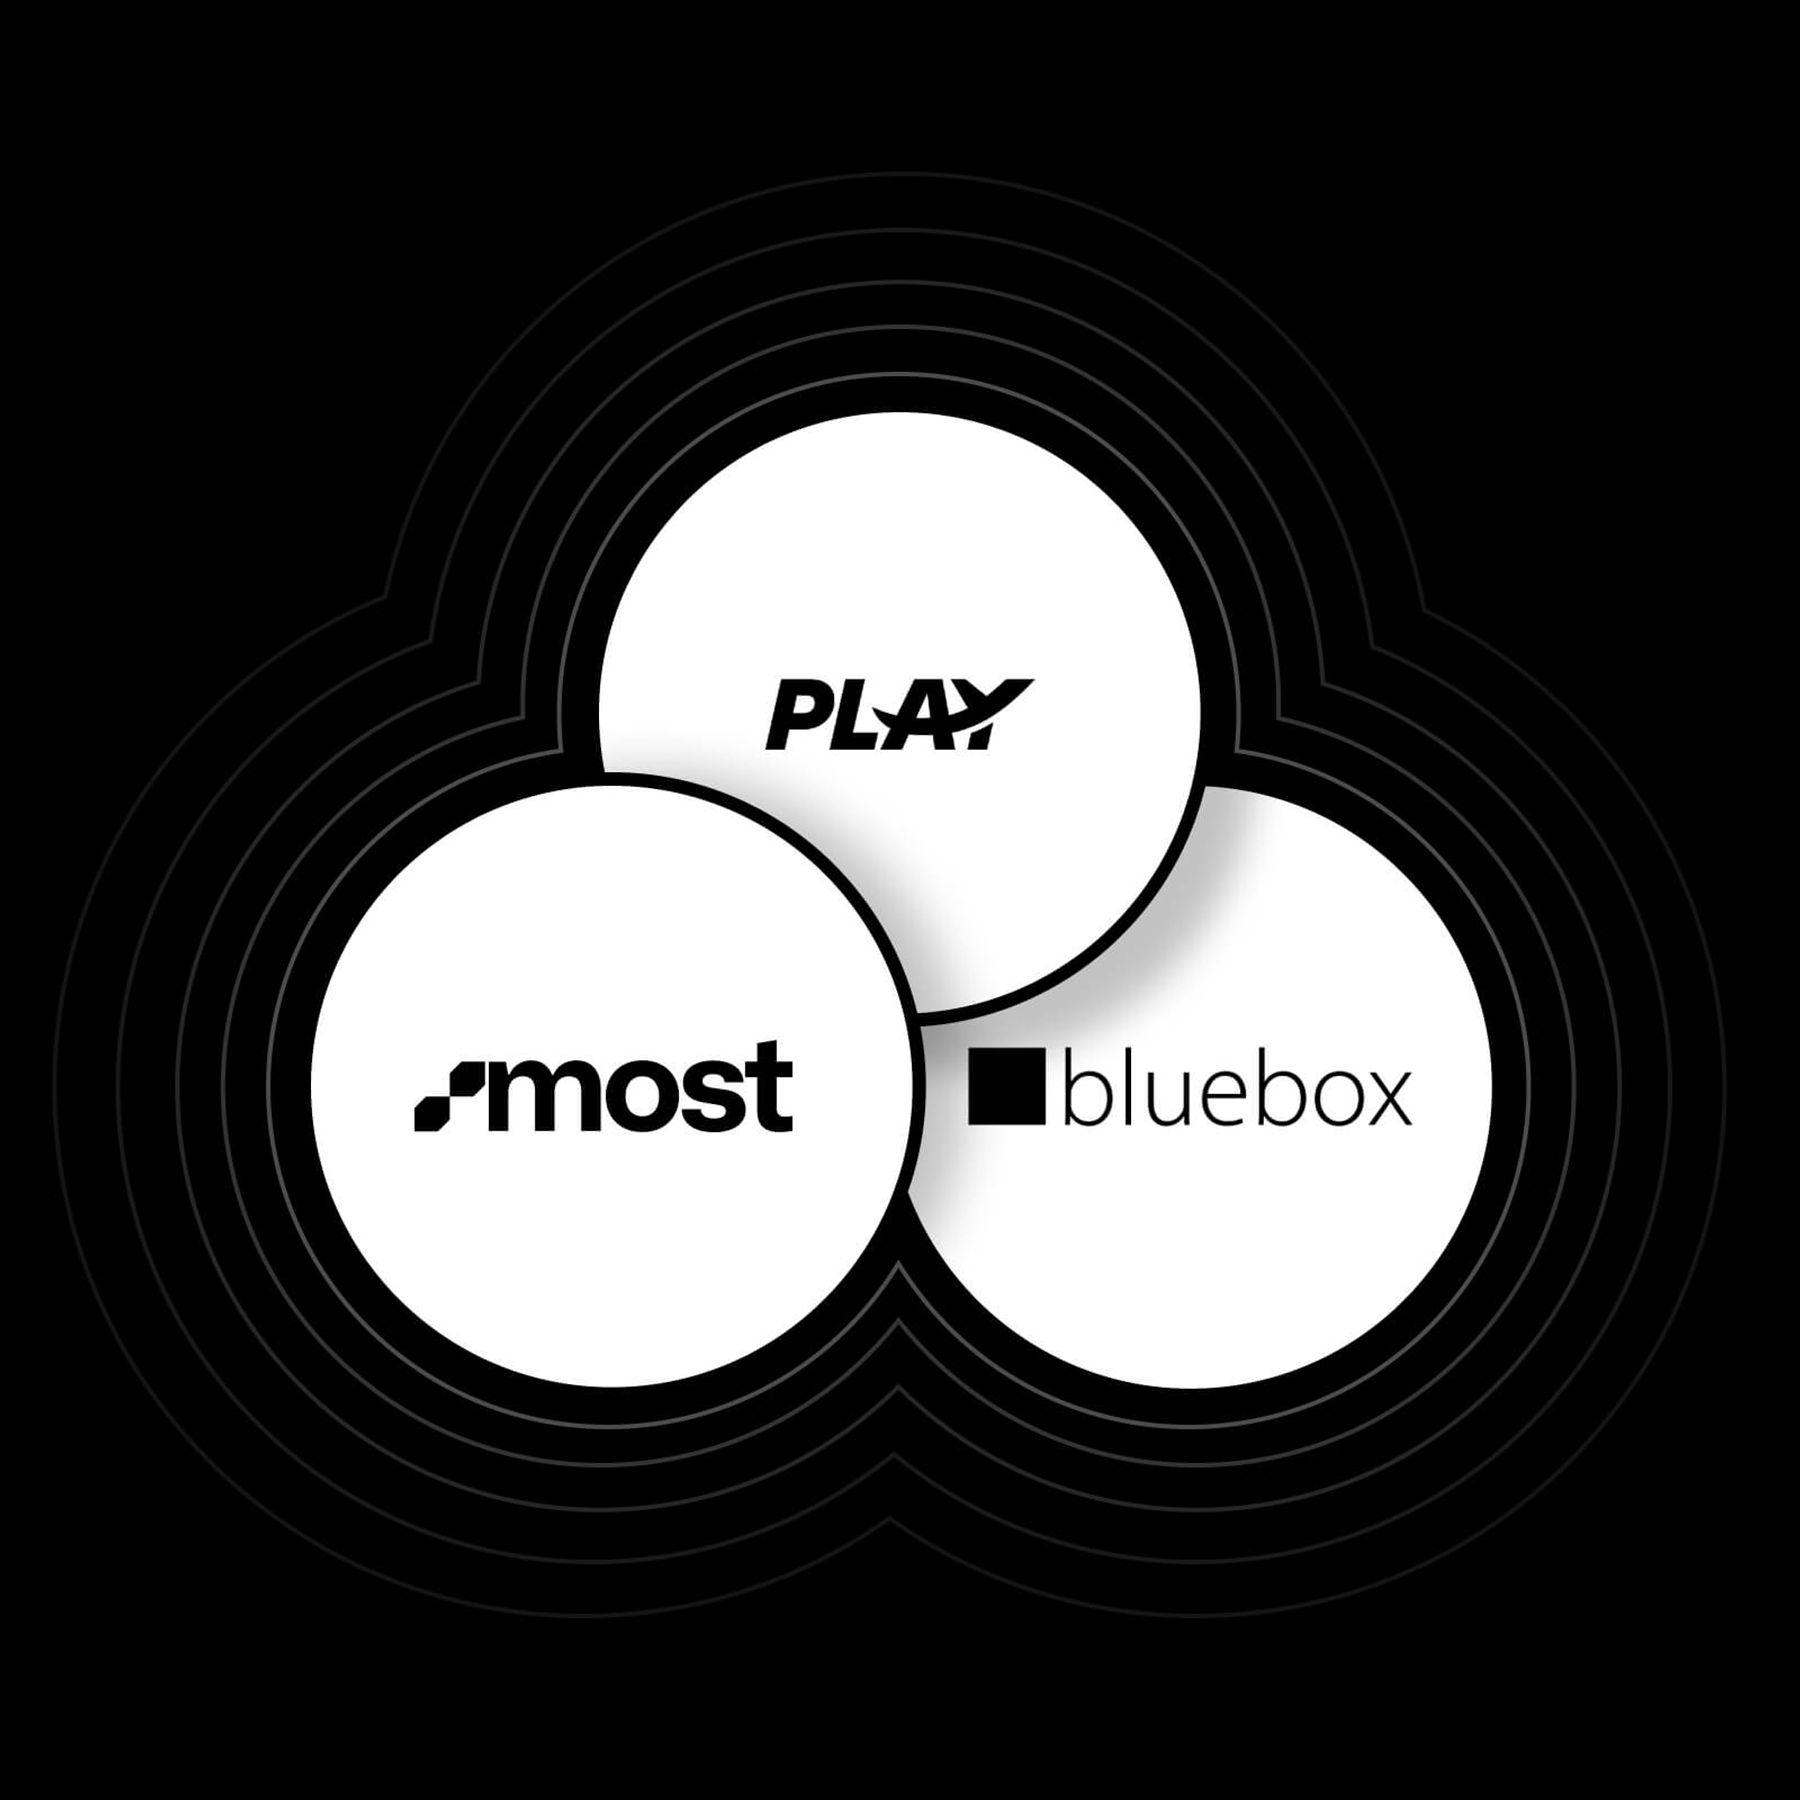 Discussion with Play, Bluebox and MOST